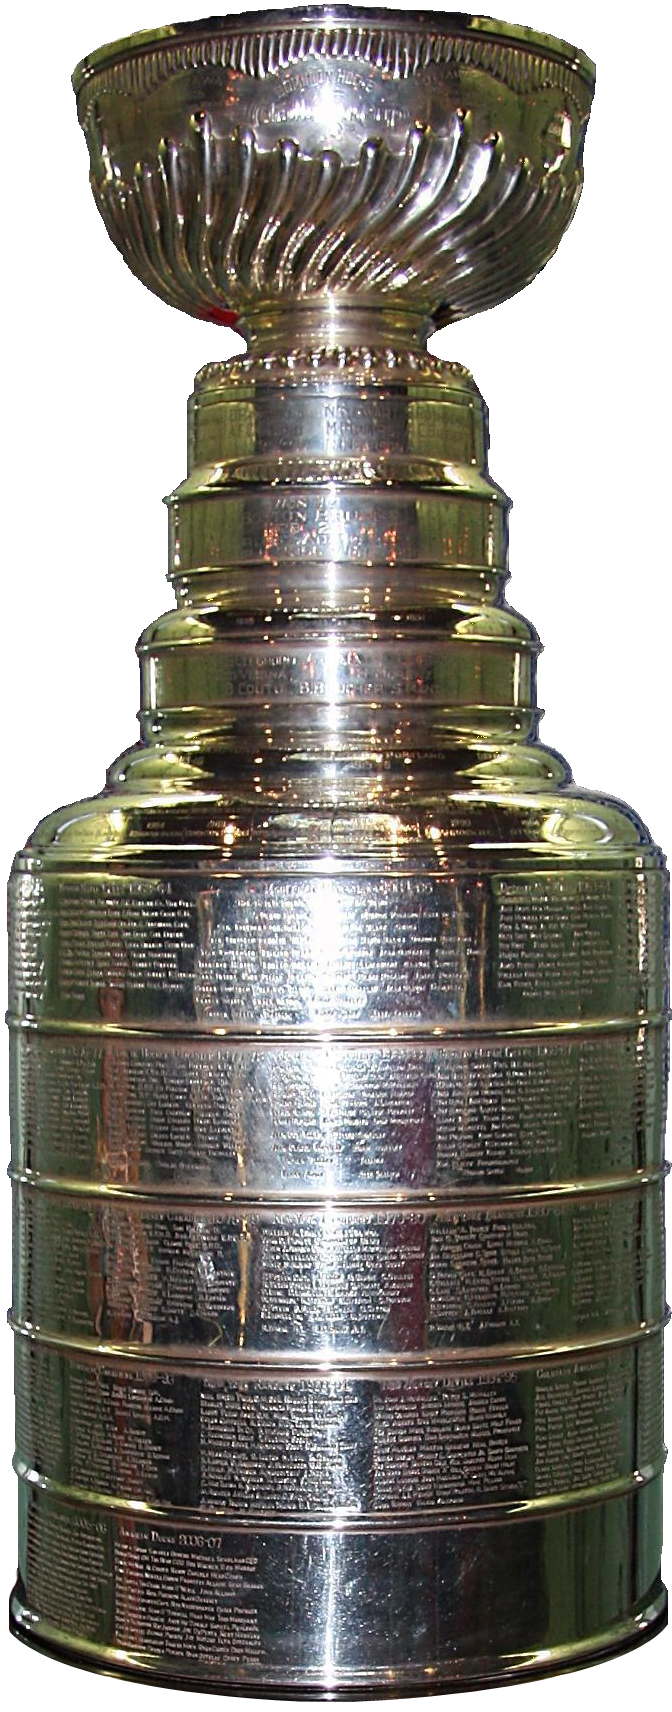 Washington Capitals engraving on the Stanley cup and Ring Ceremony 